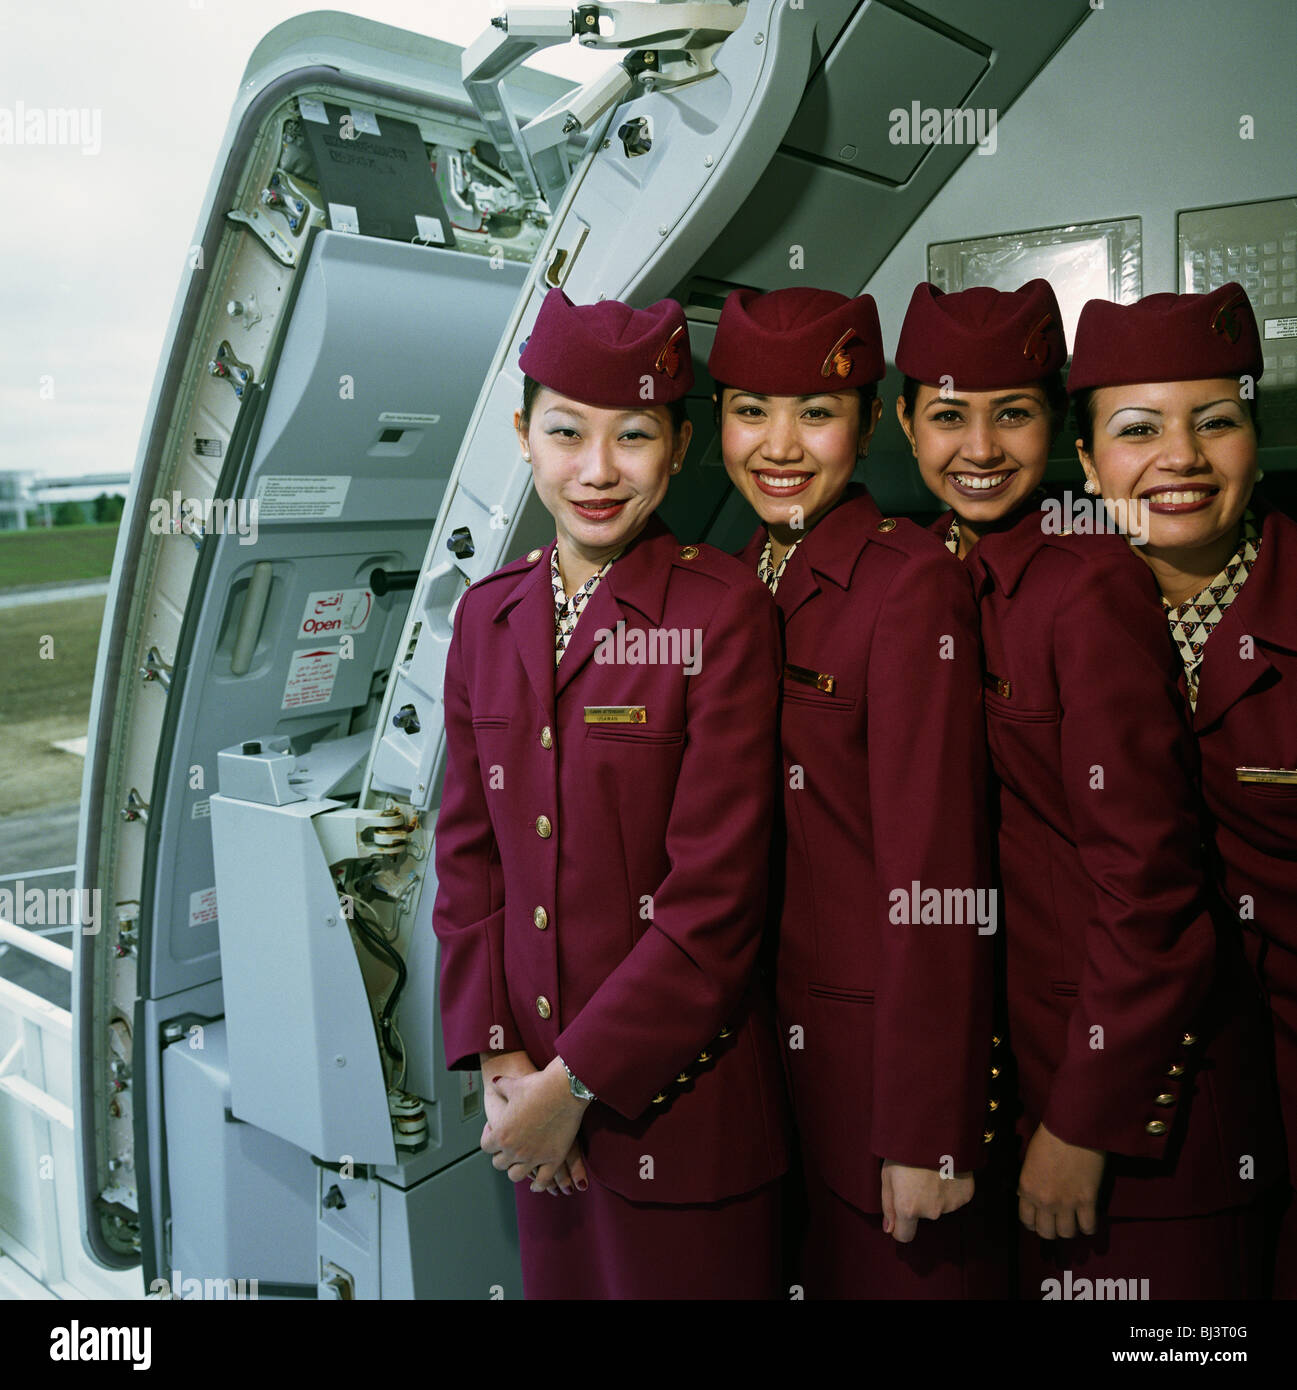 Sloppy I eat breakfast moat Four female cabin crew members wear the uniforms of Qatar Airways stand in  the open doorway of an Airbus A319CJ Business jet Stock Photo - Alamy